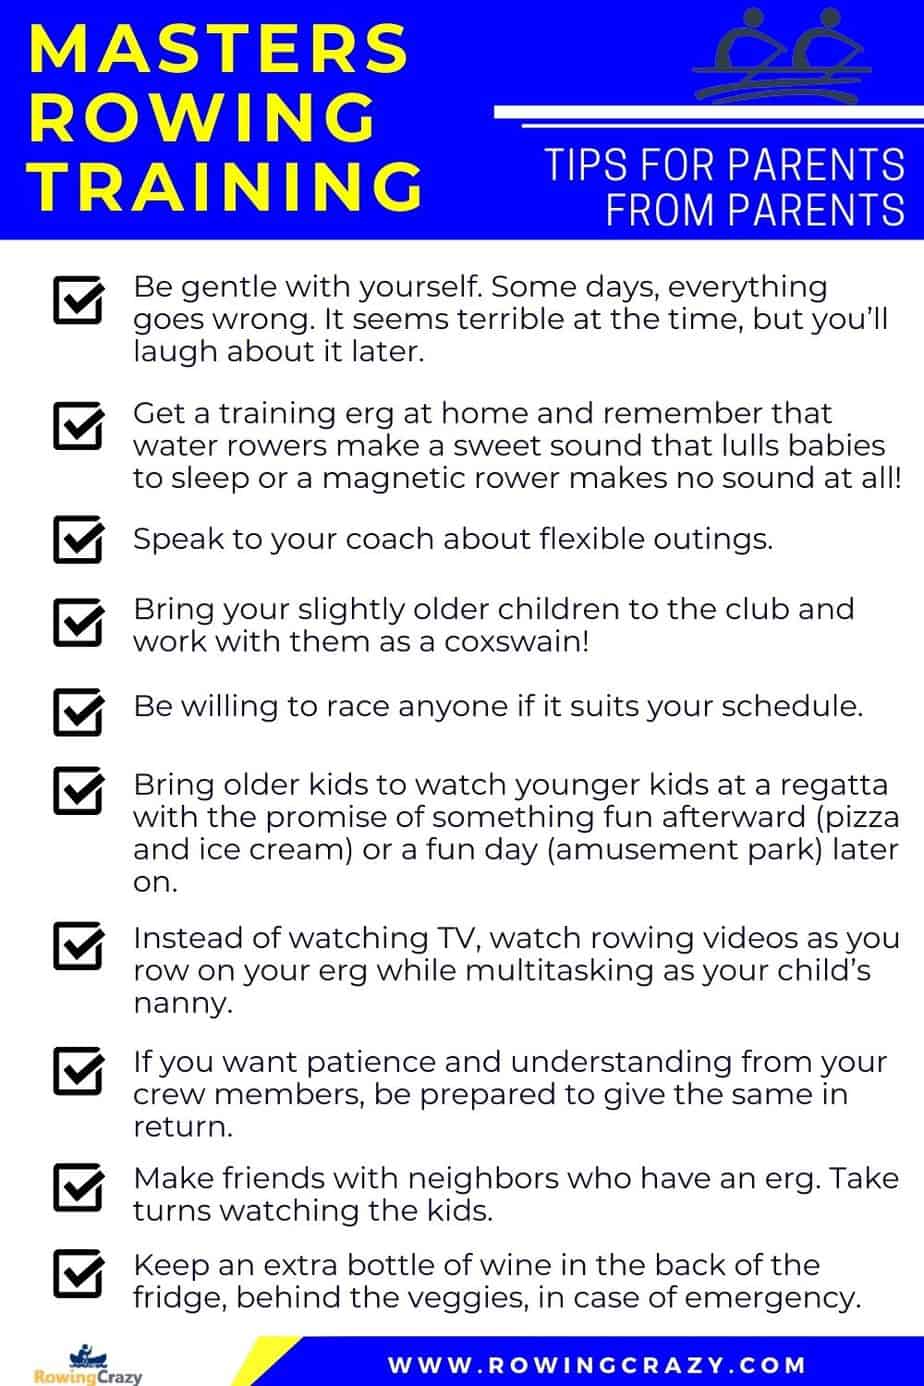 How to manager rowing training for parents - www.rowingcrazy.com 